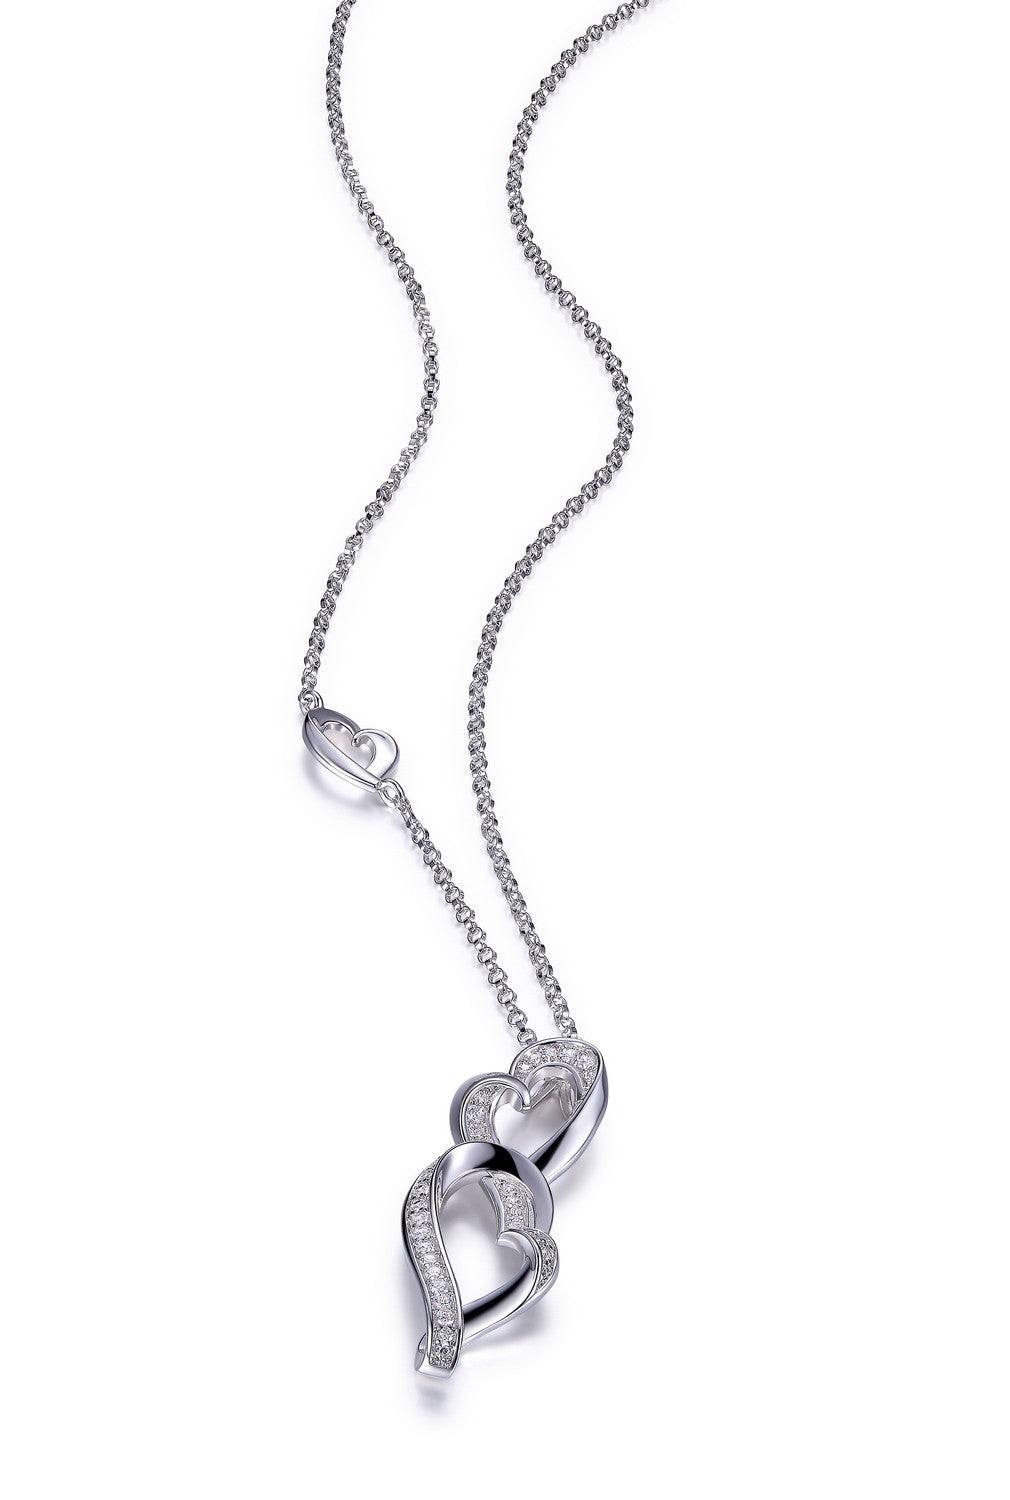 Sterling Silver Heart Necklace, 18 "